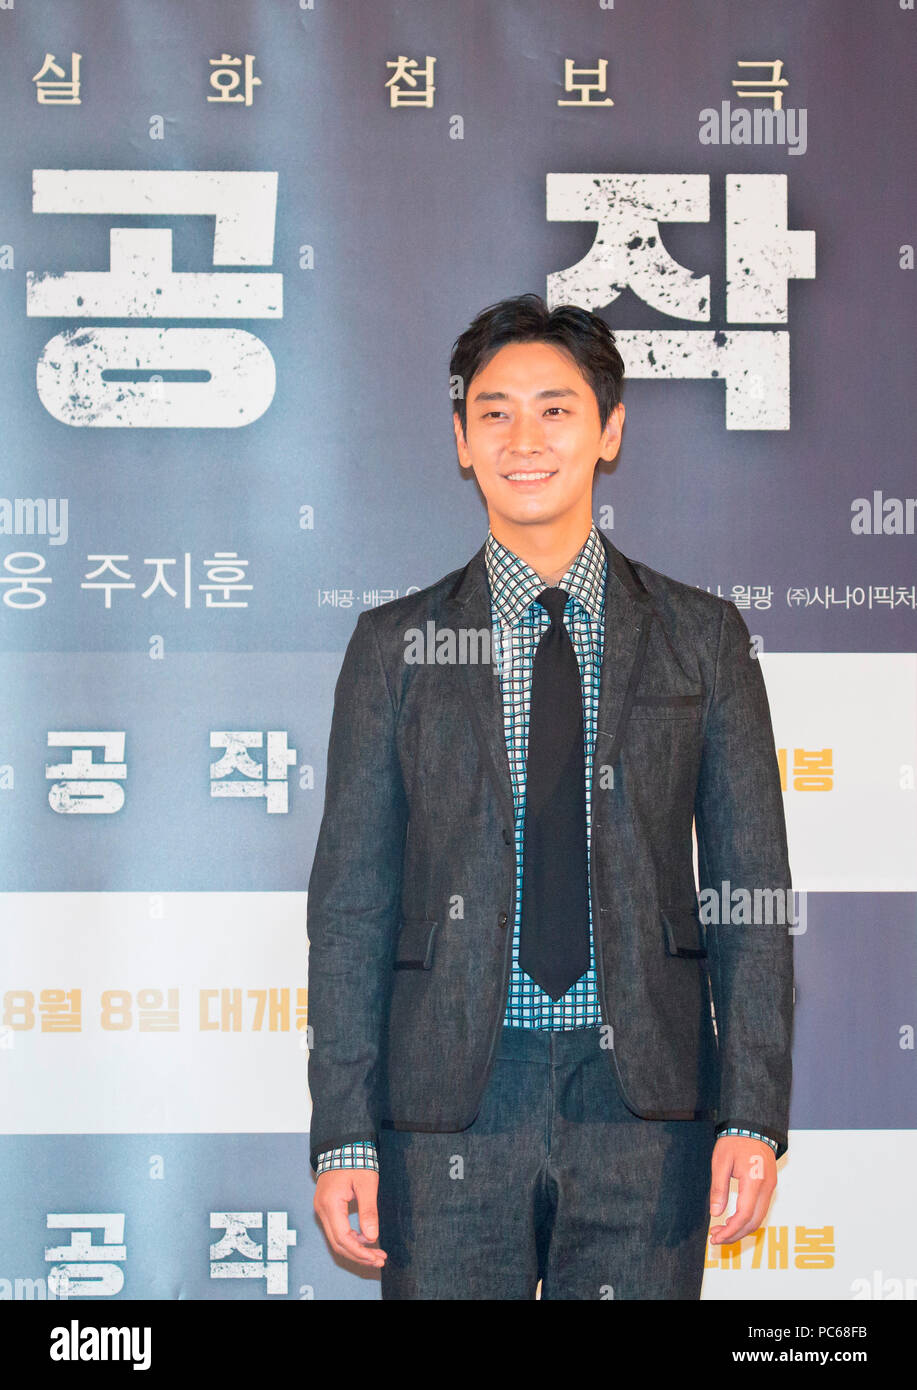 Ju Ji-Hoon, July 31, 2018 : South Korean actor Ju Ji-Hoon attends a press conference for his new film 'The Spy Gone North' at a theatre in Seoul, South Korea. The spy film tells the story of a South Korean spy who goes undercover as a businessman in North Korea in the 1990s to infiltrate North's nuclear facilities using the codename 'Black Venus'. Credit: Lee Jae-Won/AFLO/Alamy Live News Stock Photo